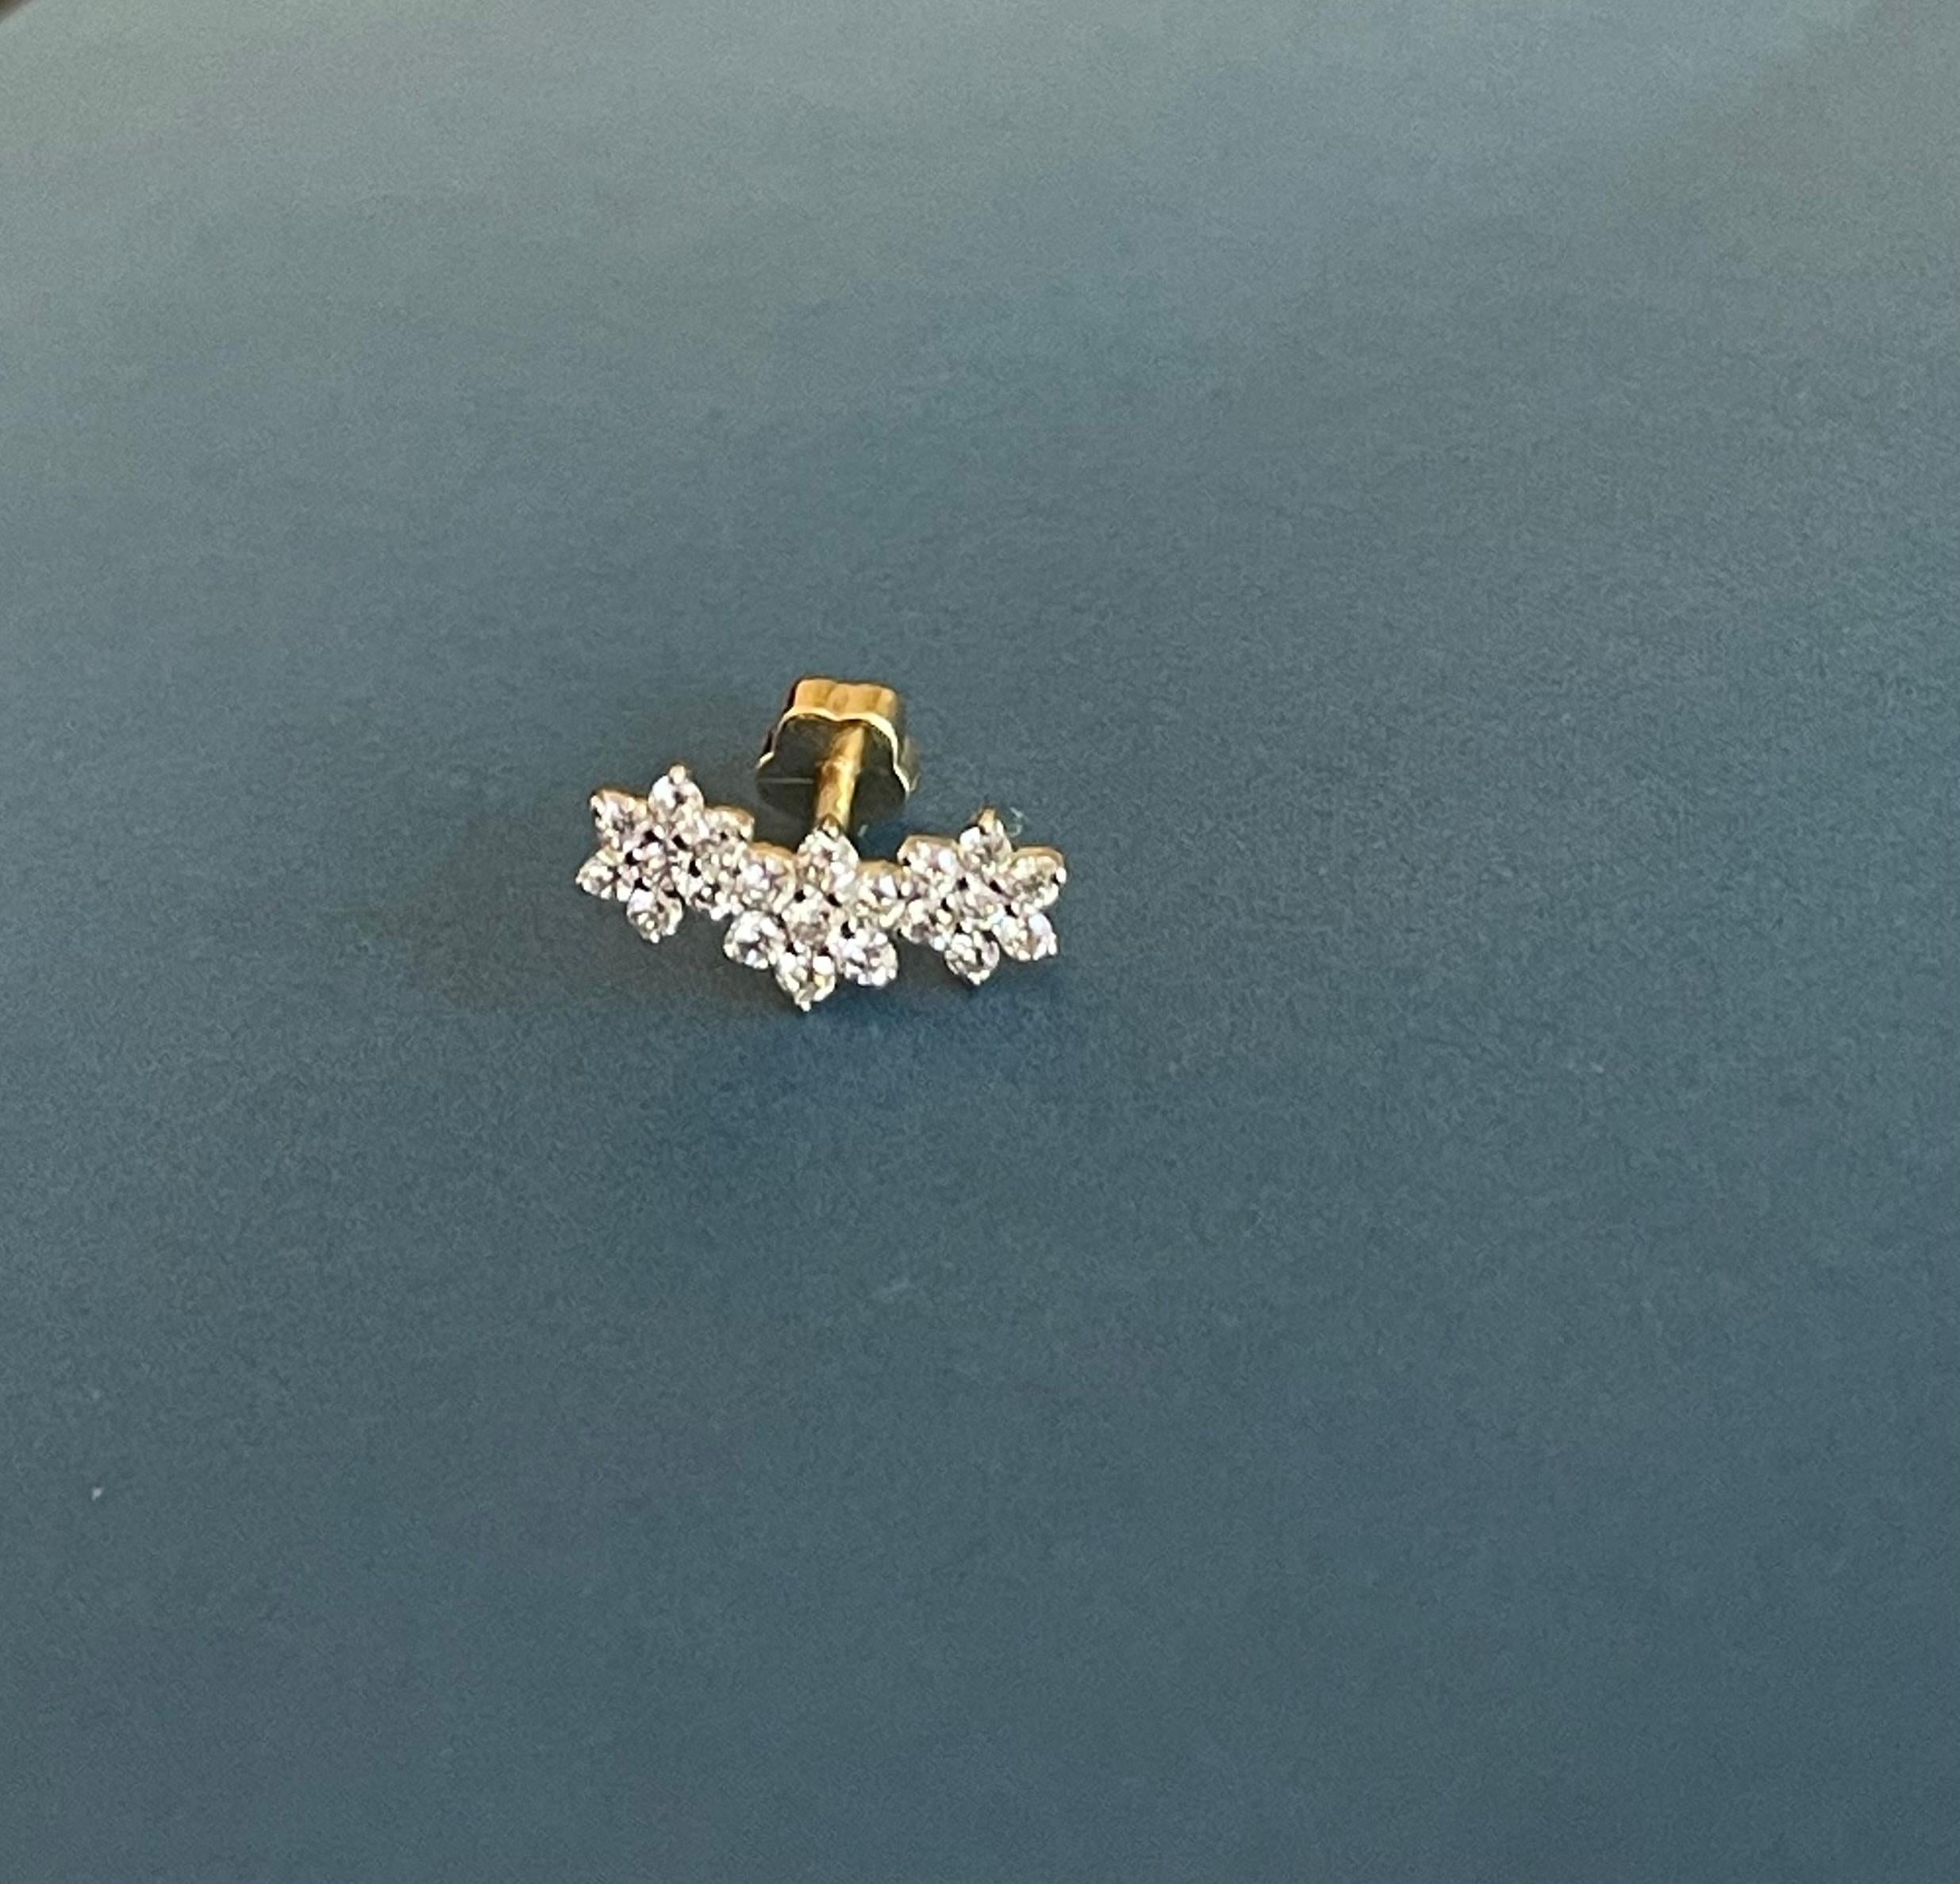 Diamond Earrings Cartilage Stud in 9ct Yellow Gold Daisy Flower 0.23ct piercings In New Condition For Sale In Ilford, GB